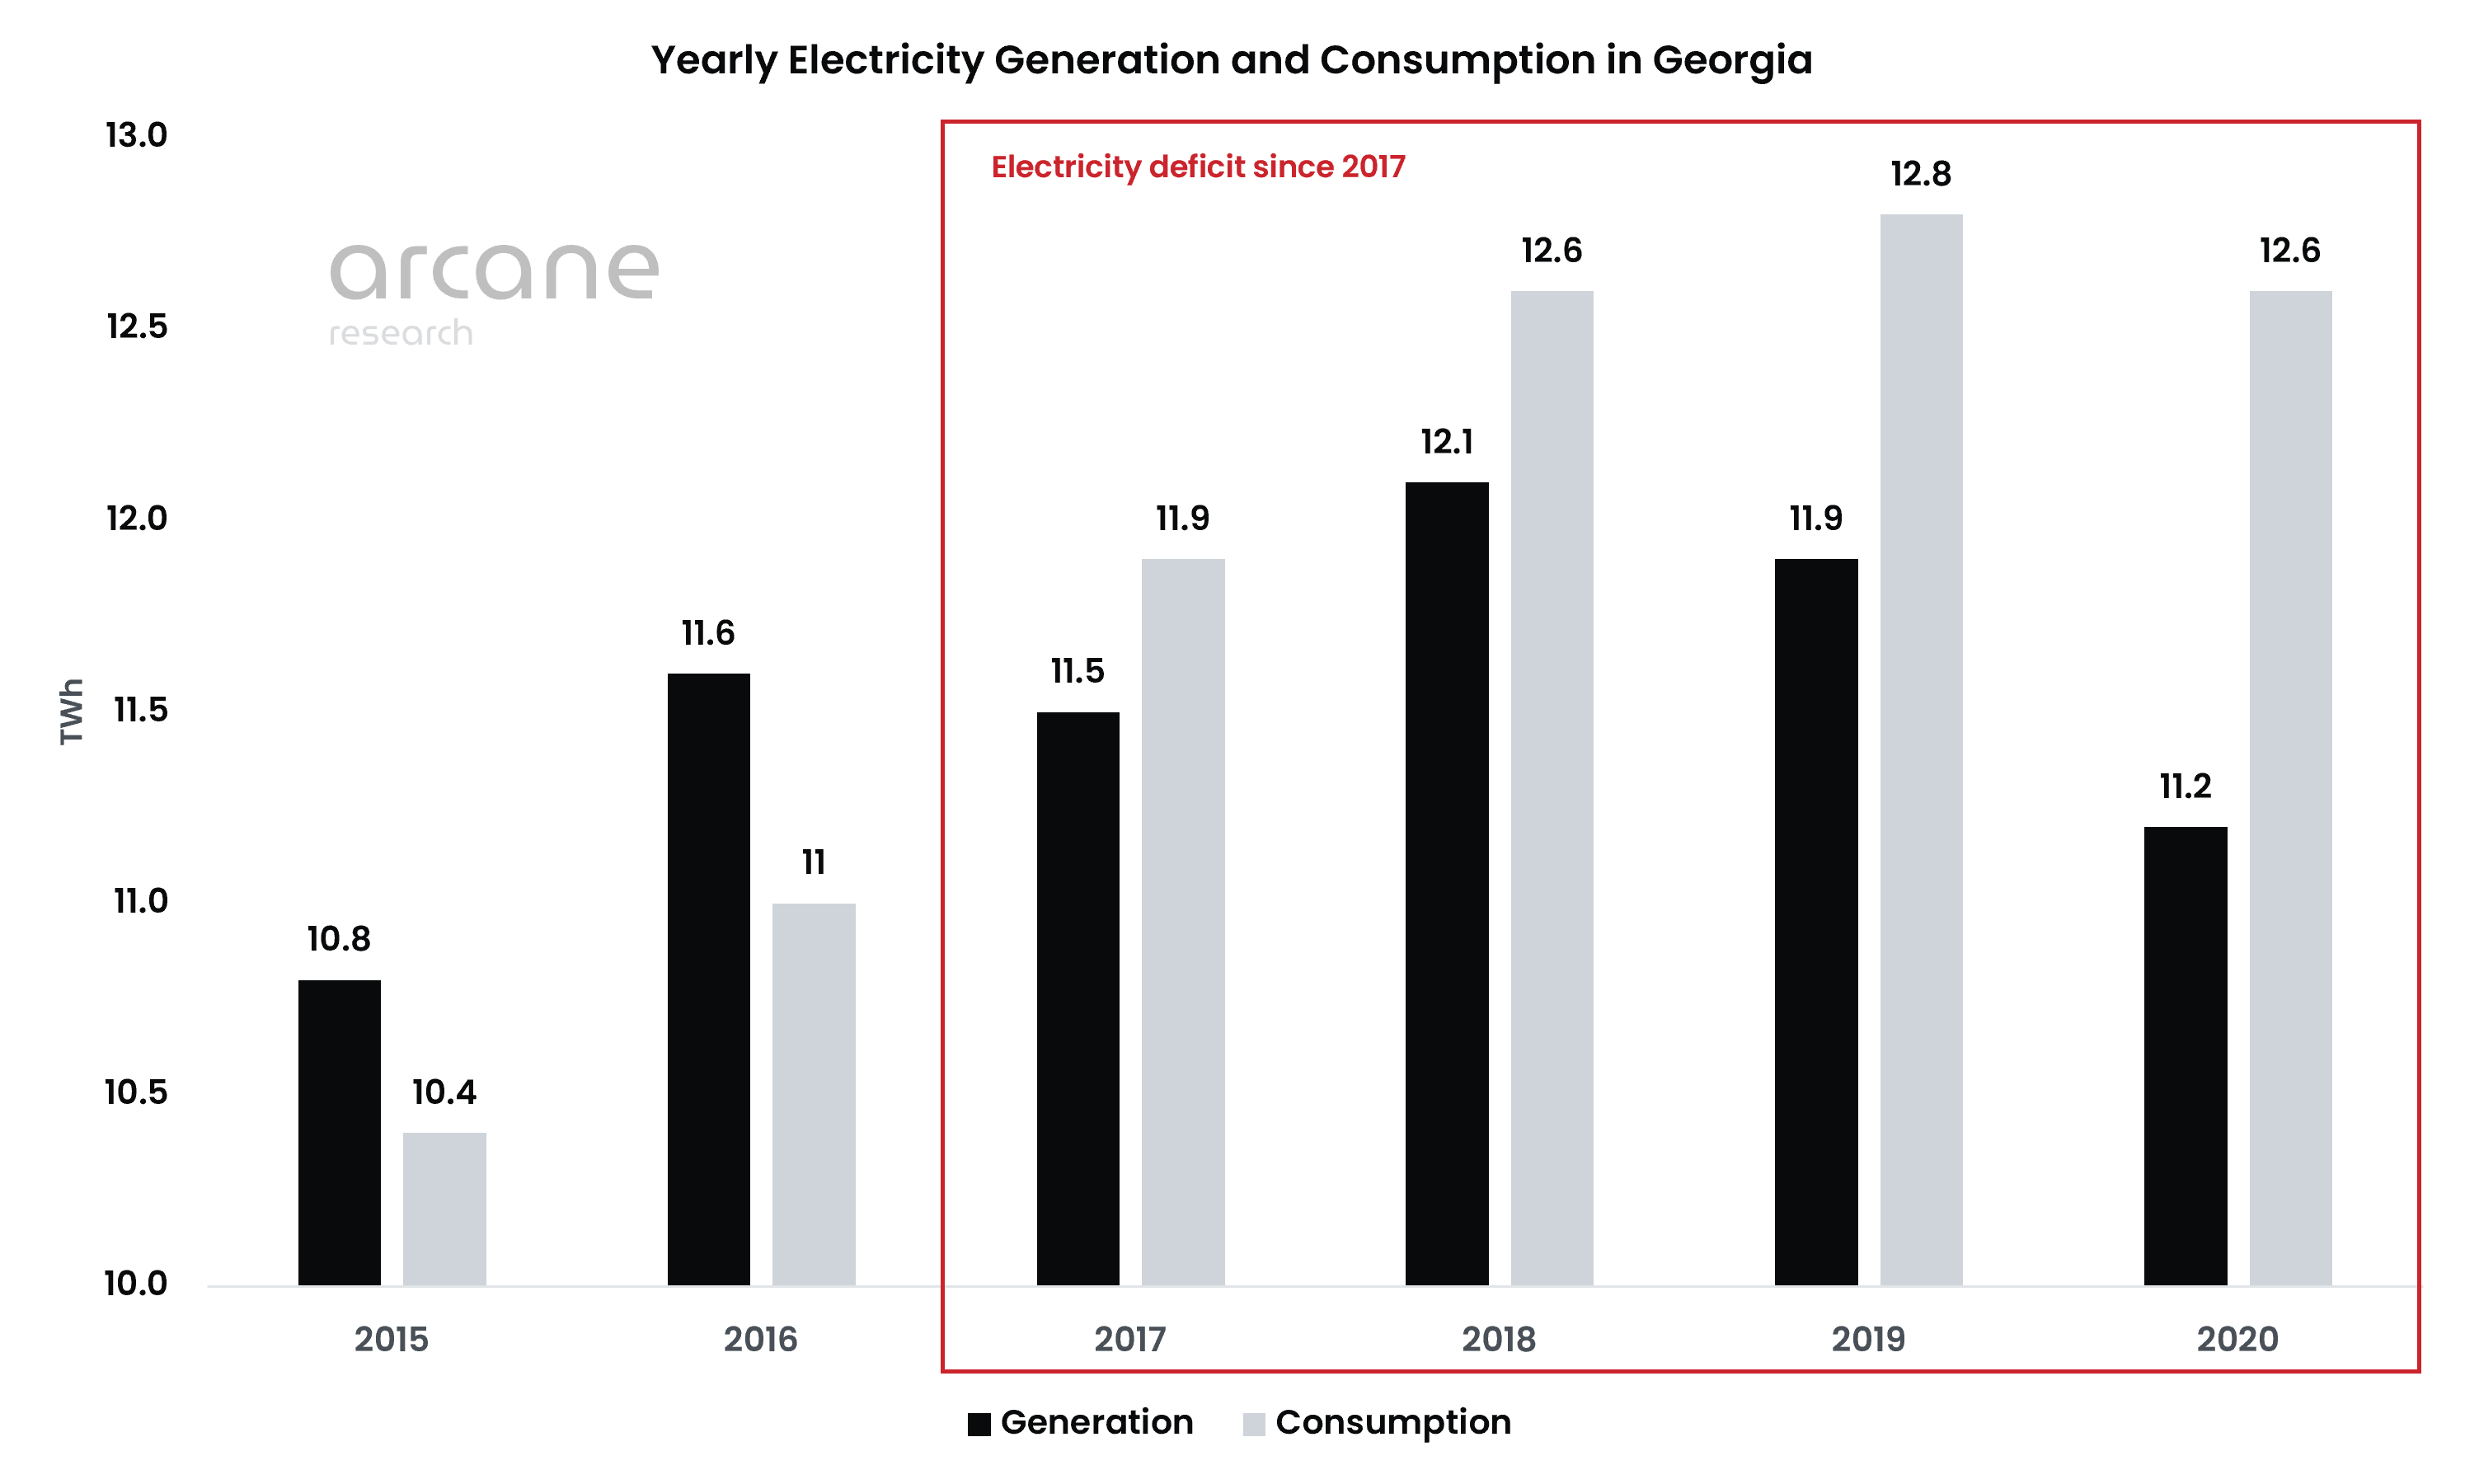 Yearly electricity generation and consumption in Georgia